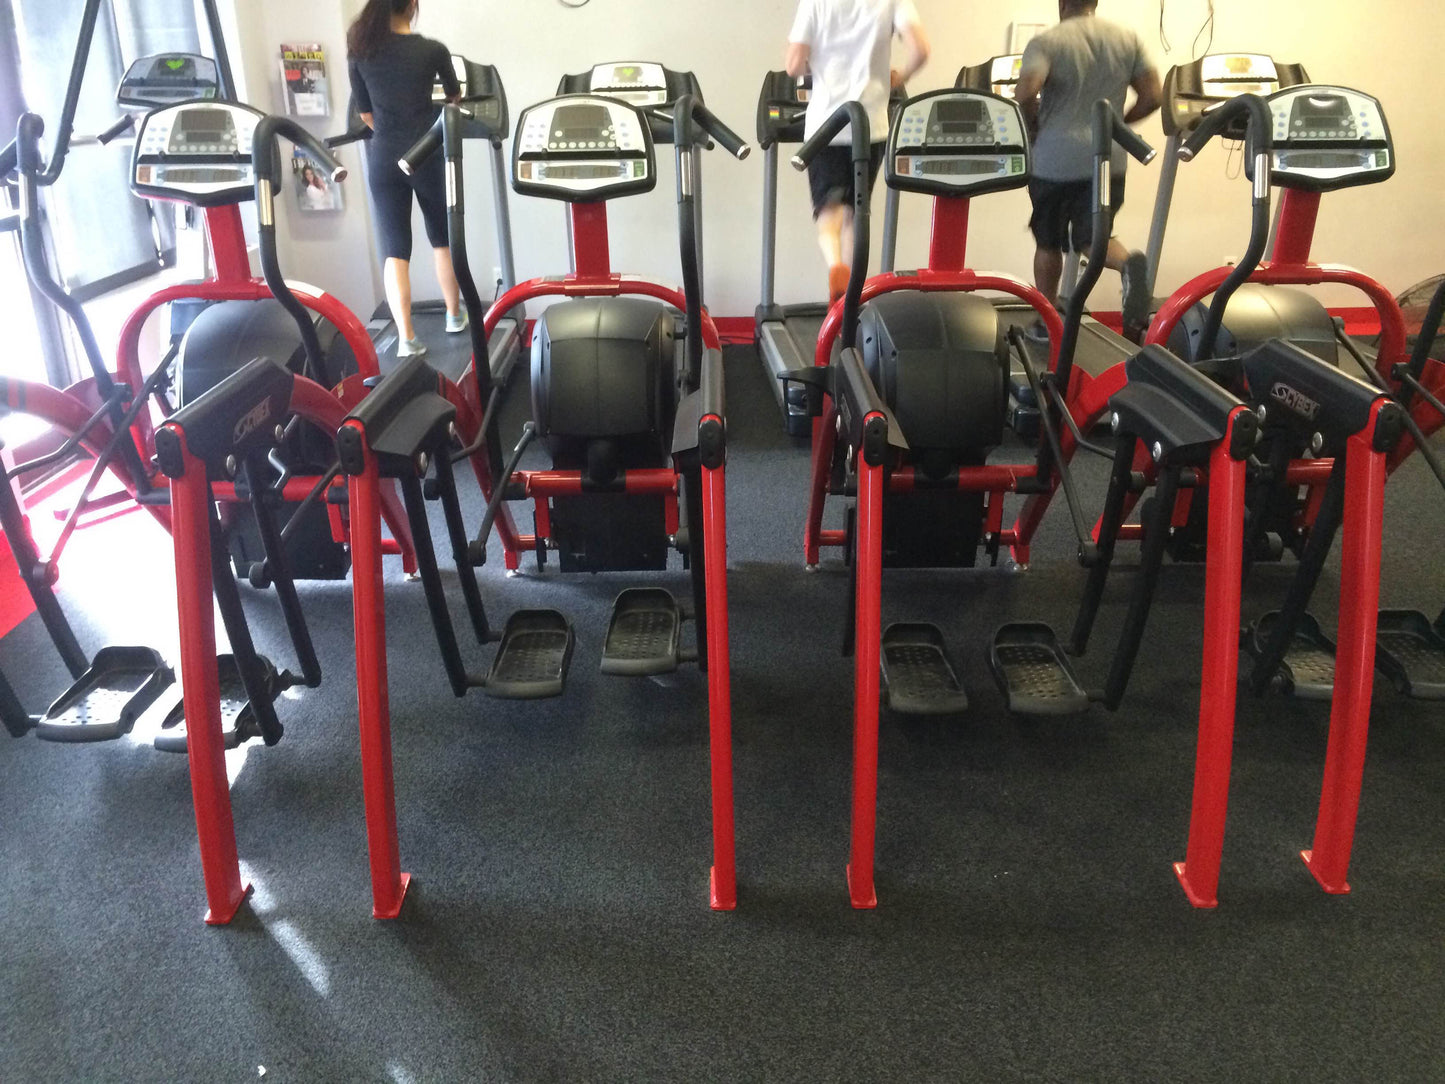 Cybex VR3 Full Gym Package Cardio/Circuit and much more!